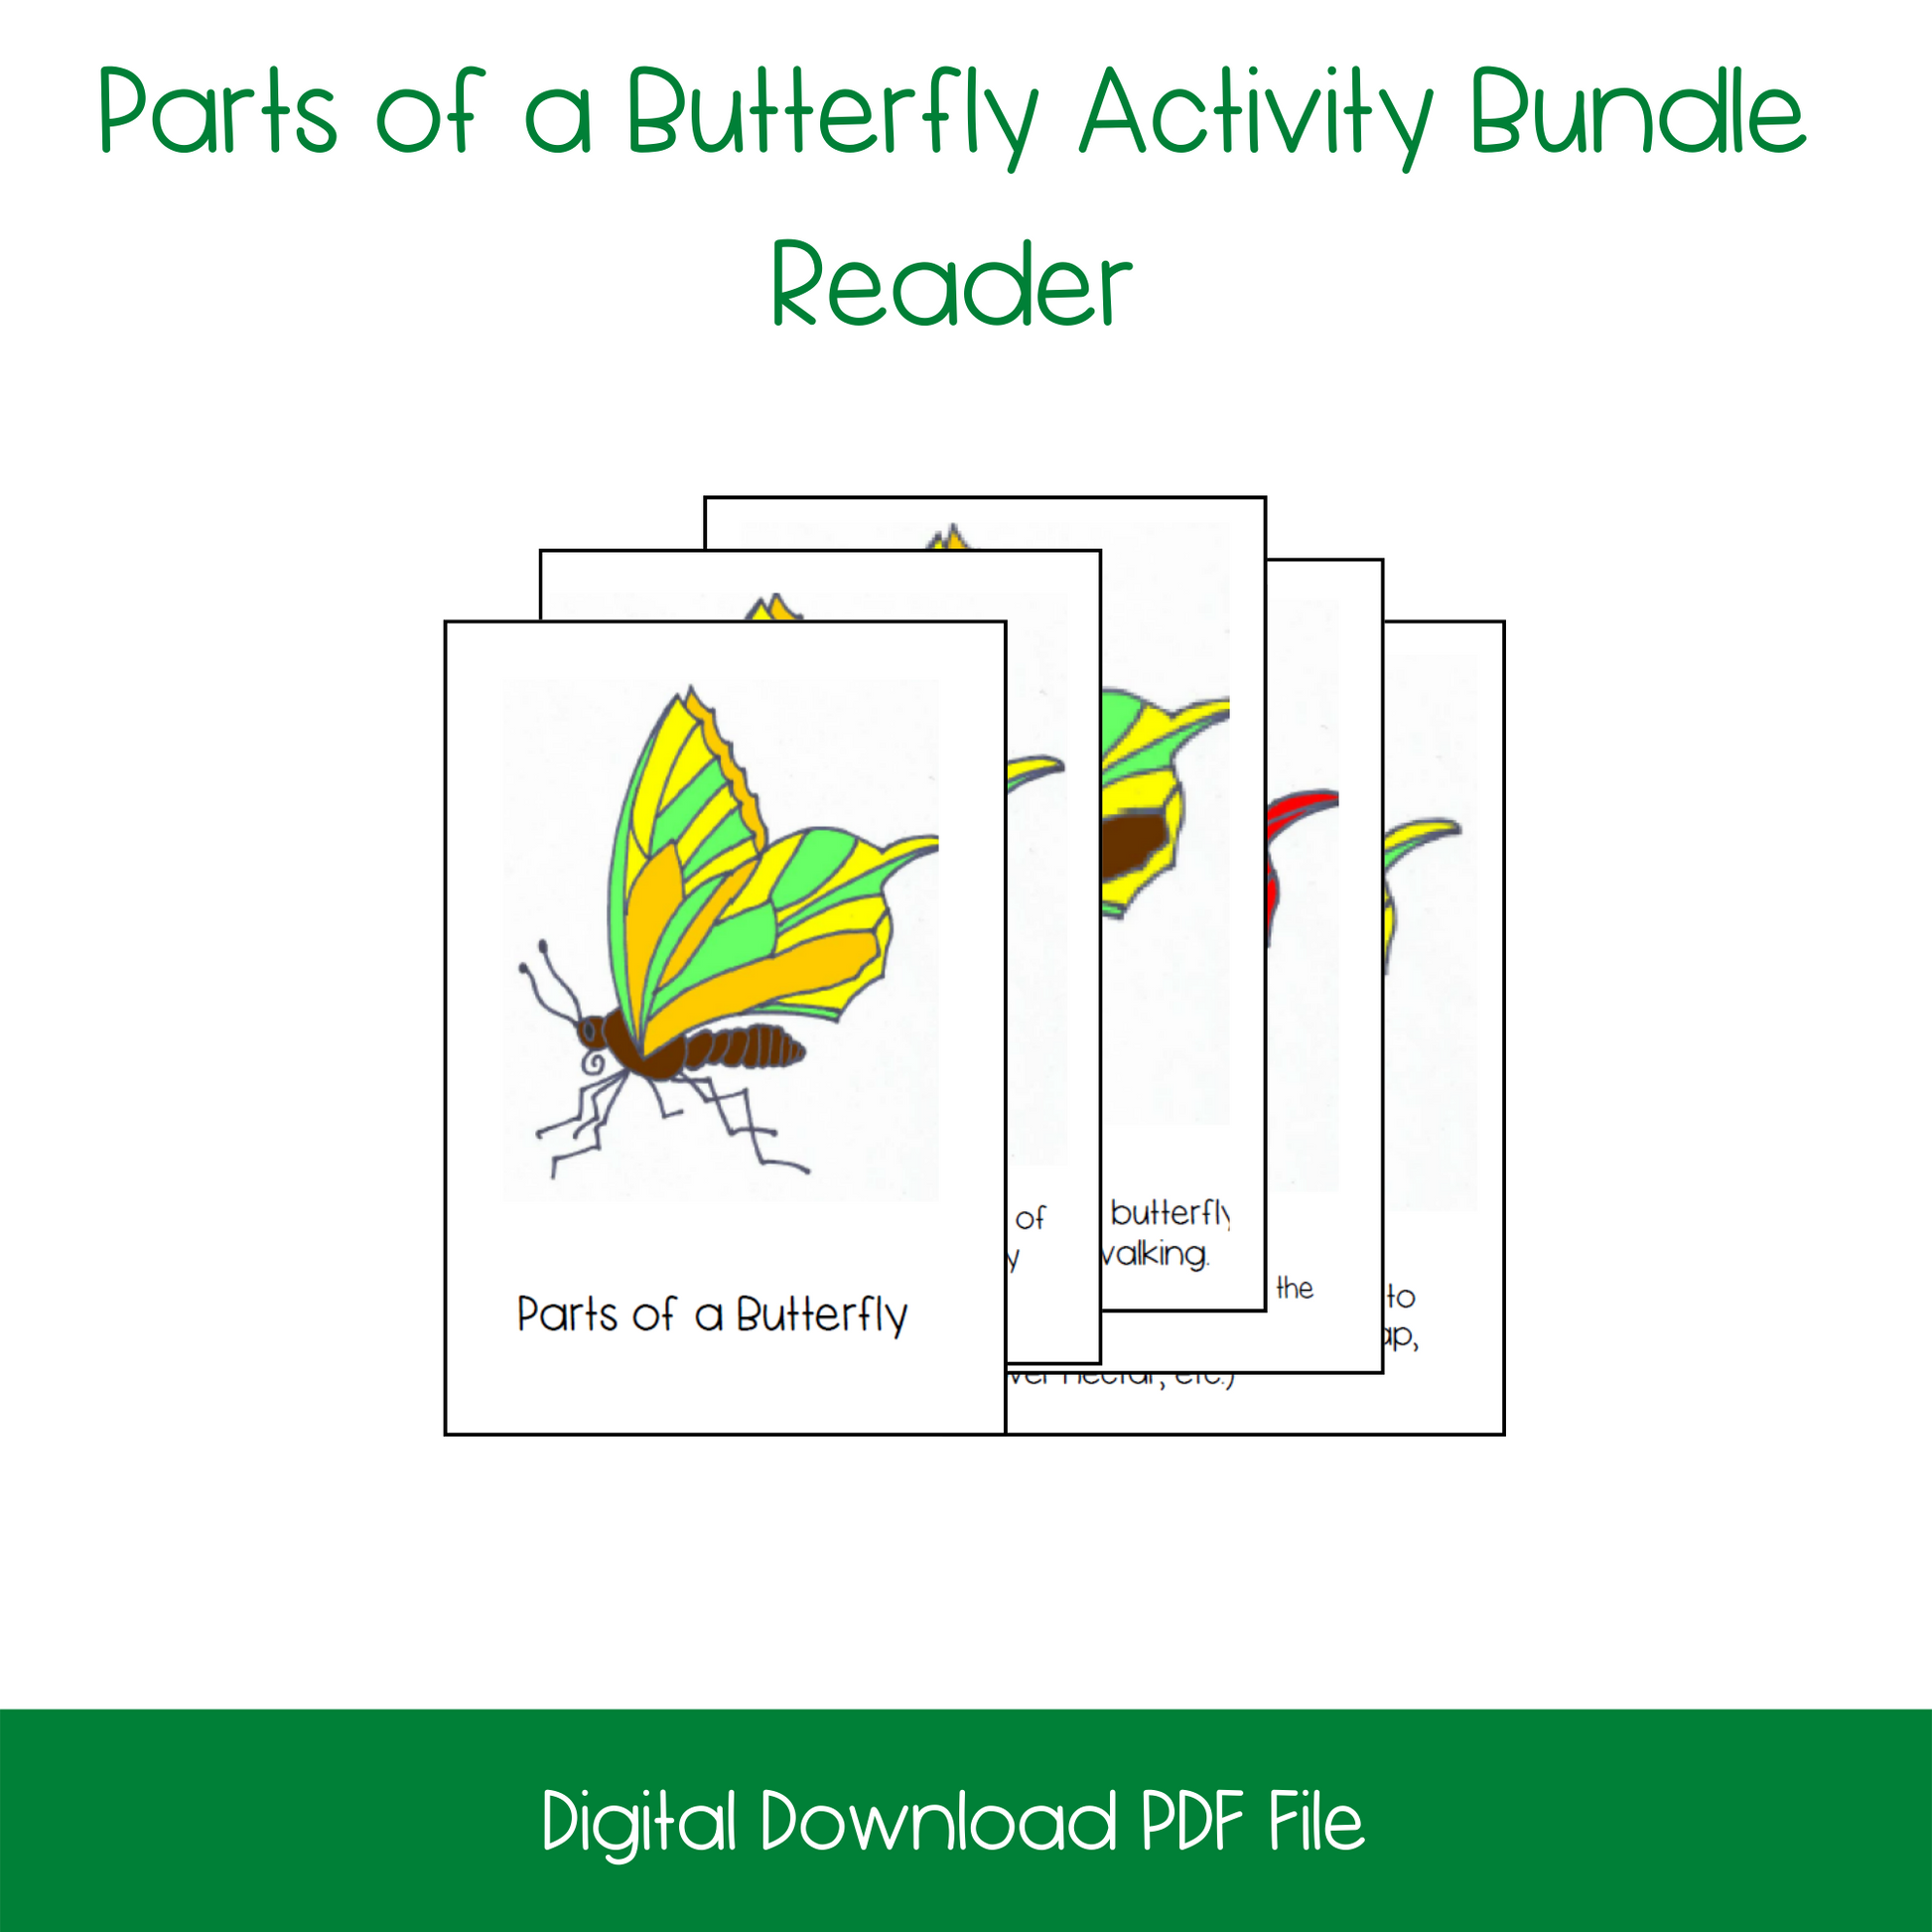 Montessori Parts of a Butterfly Nomenclature and 3-Part Cards, printable kindergarten life science activity, printable elementary life science activity, printable butterfly lesson activity